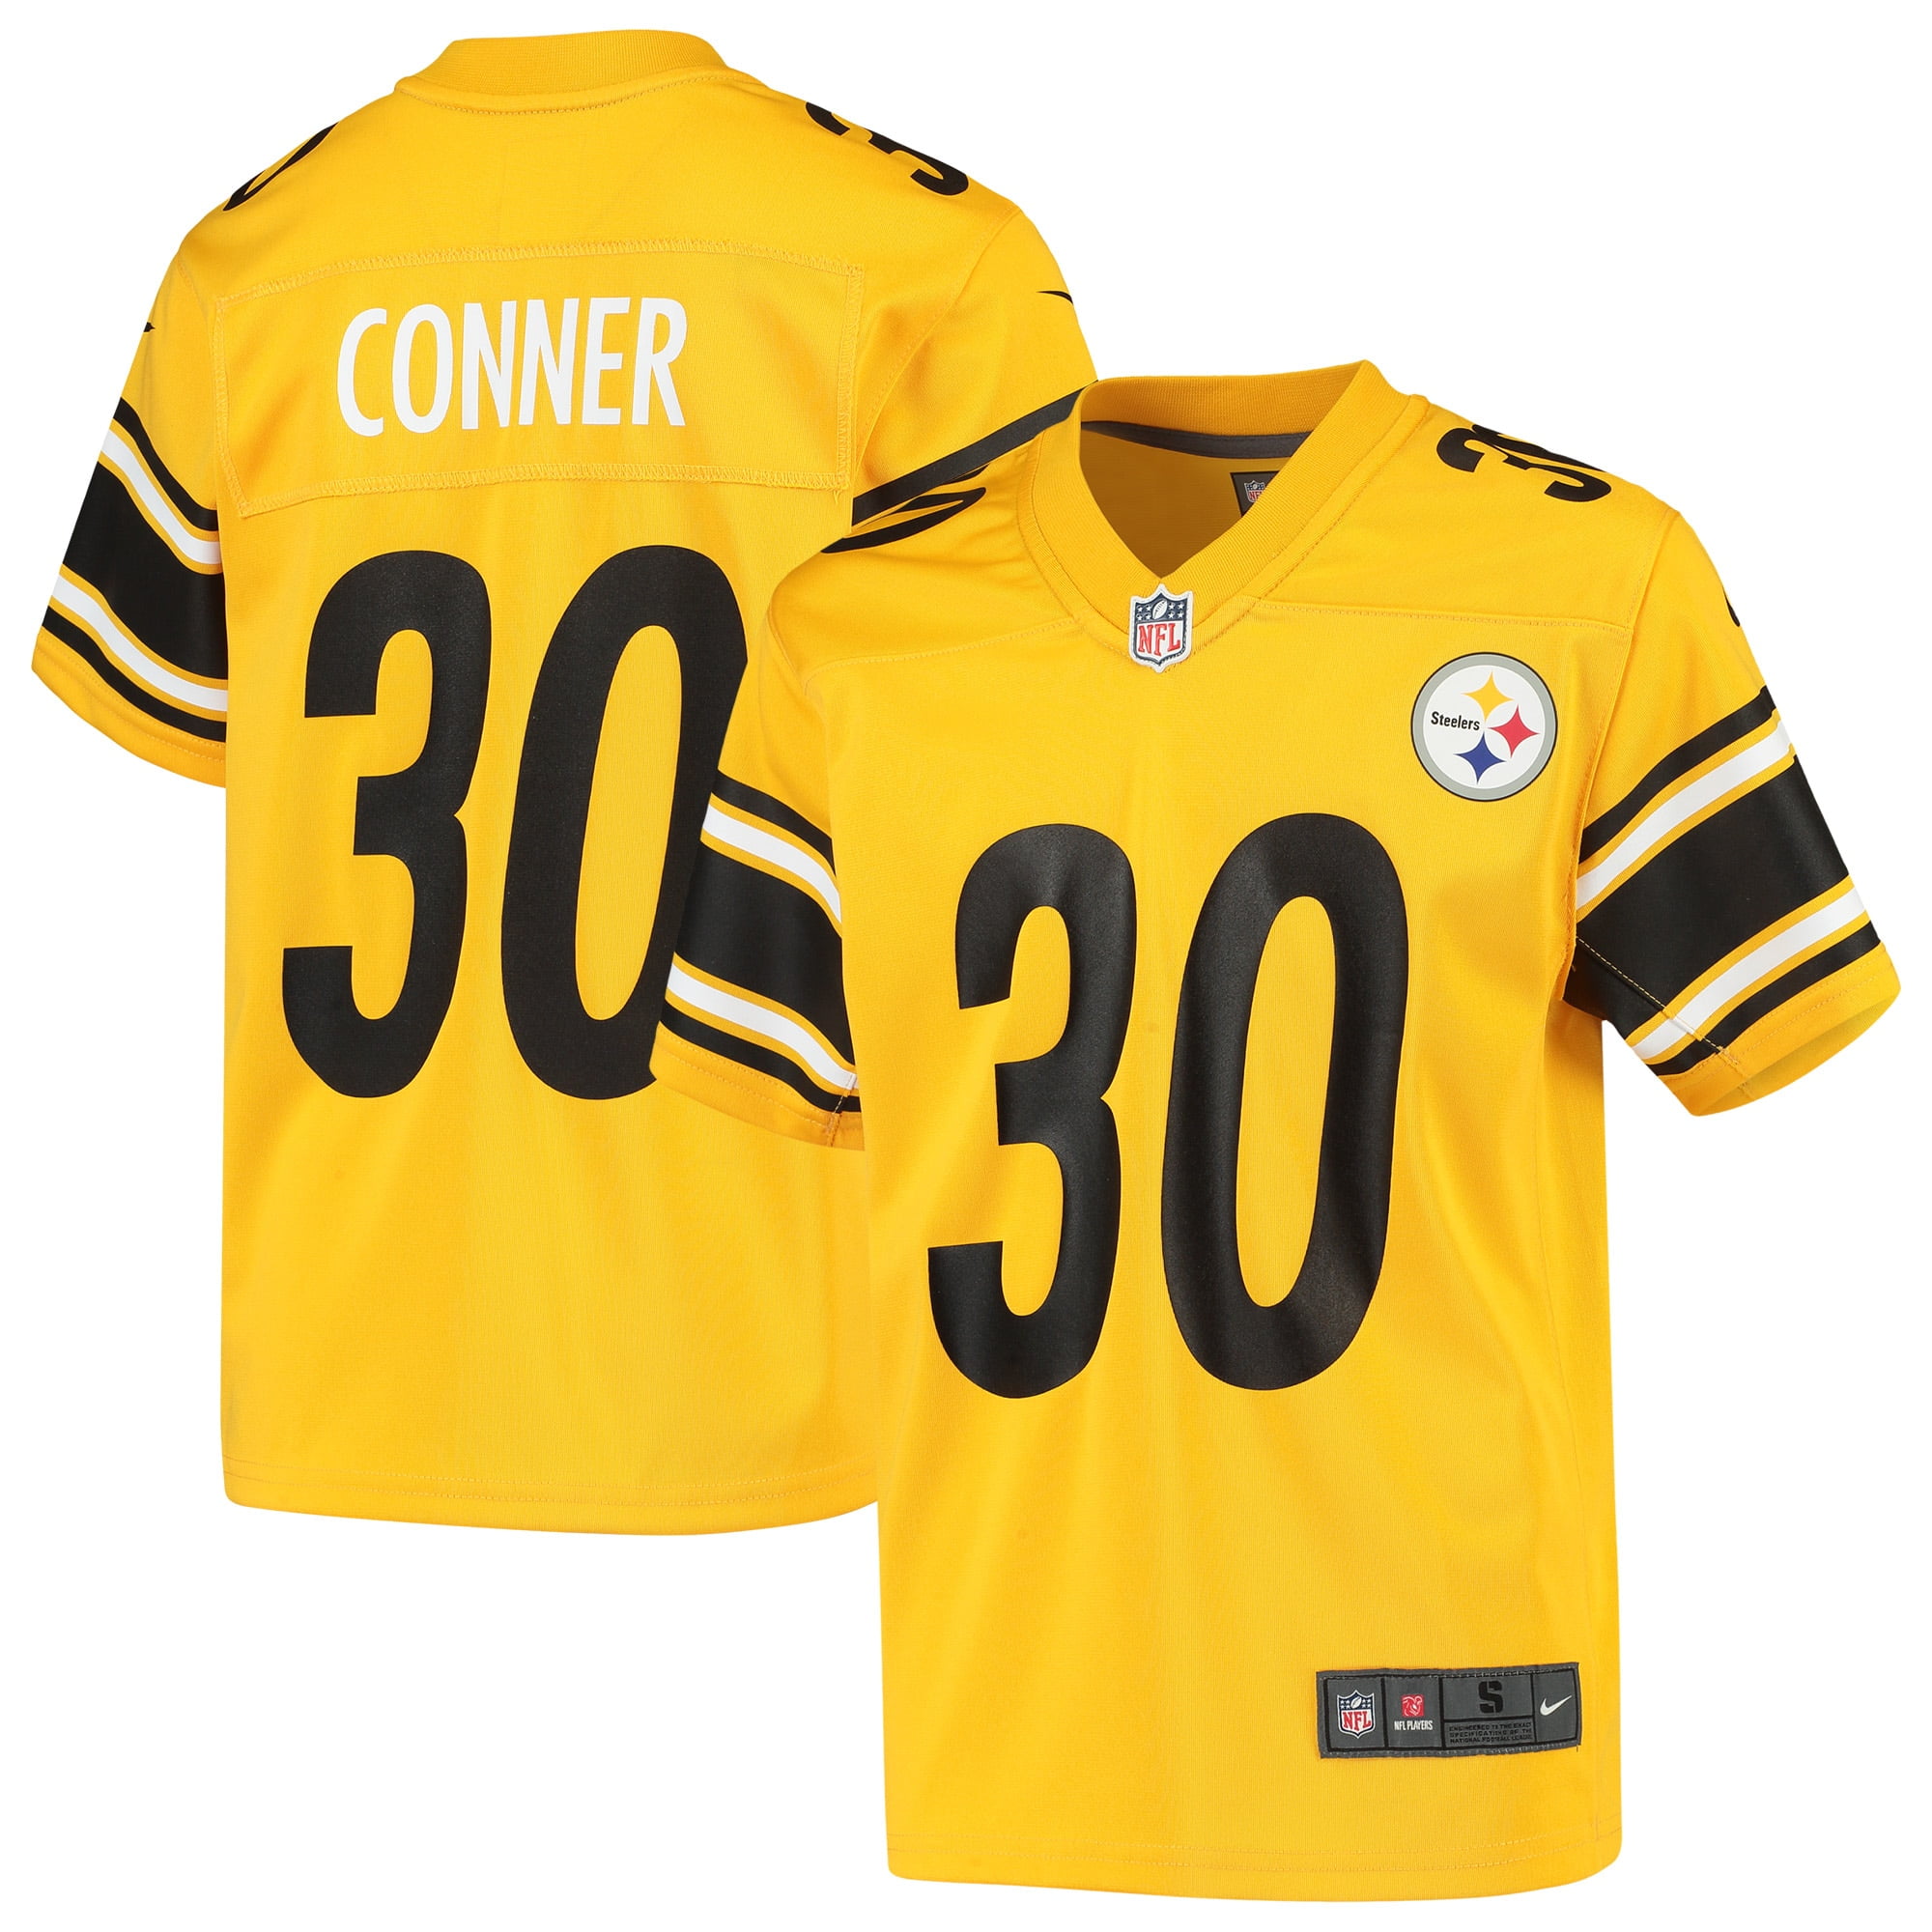 conner steelers jersey